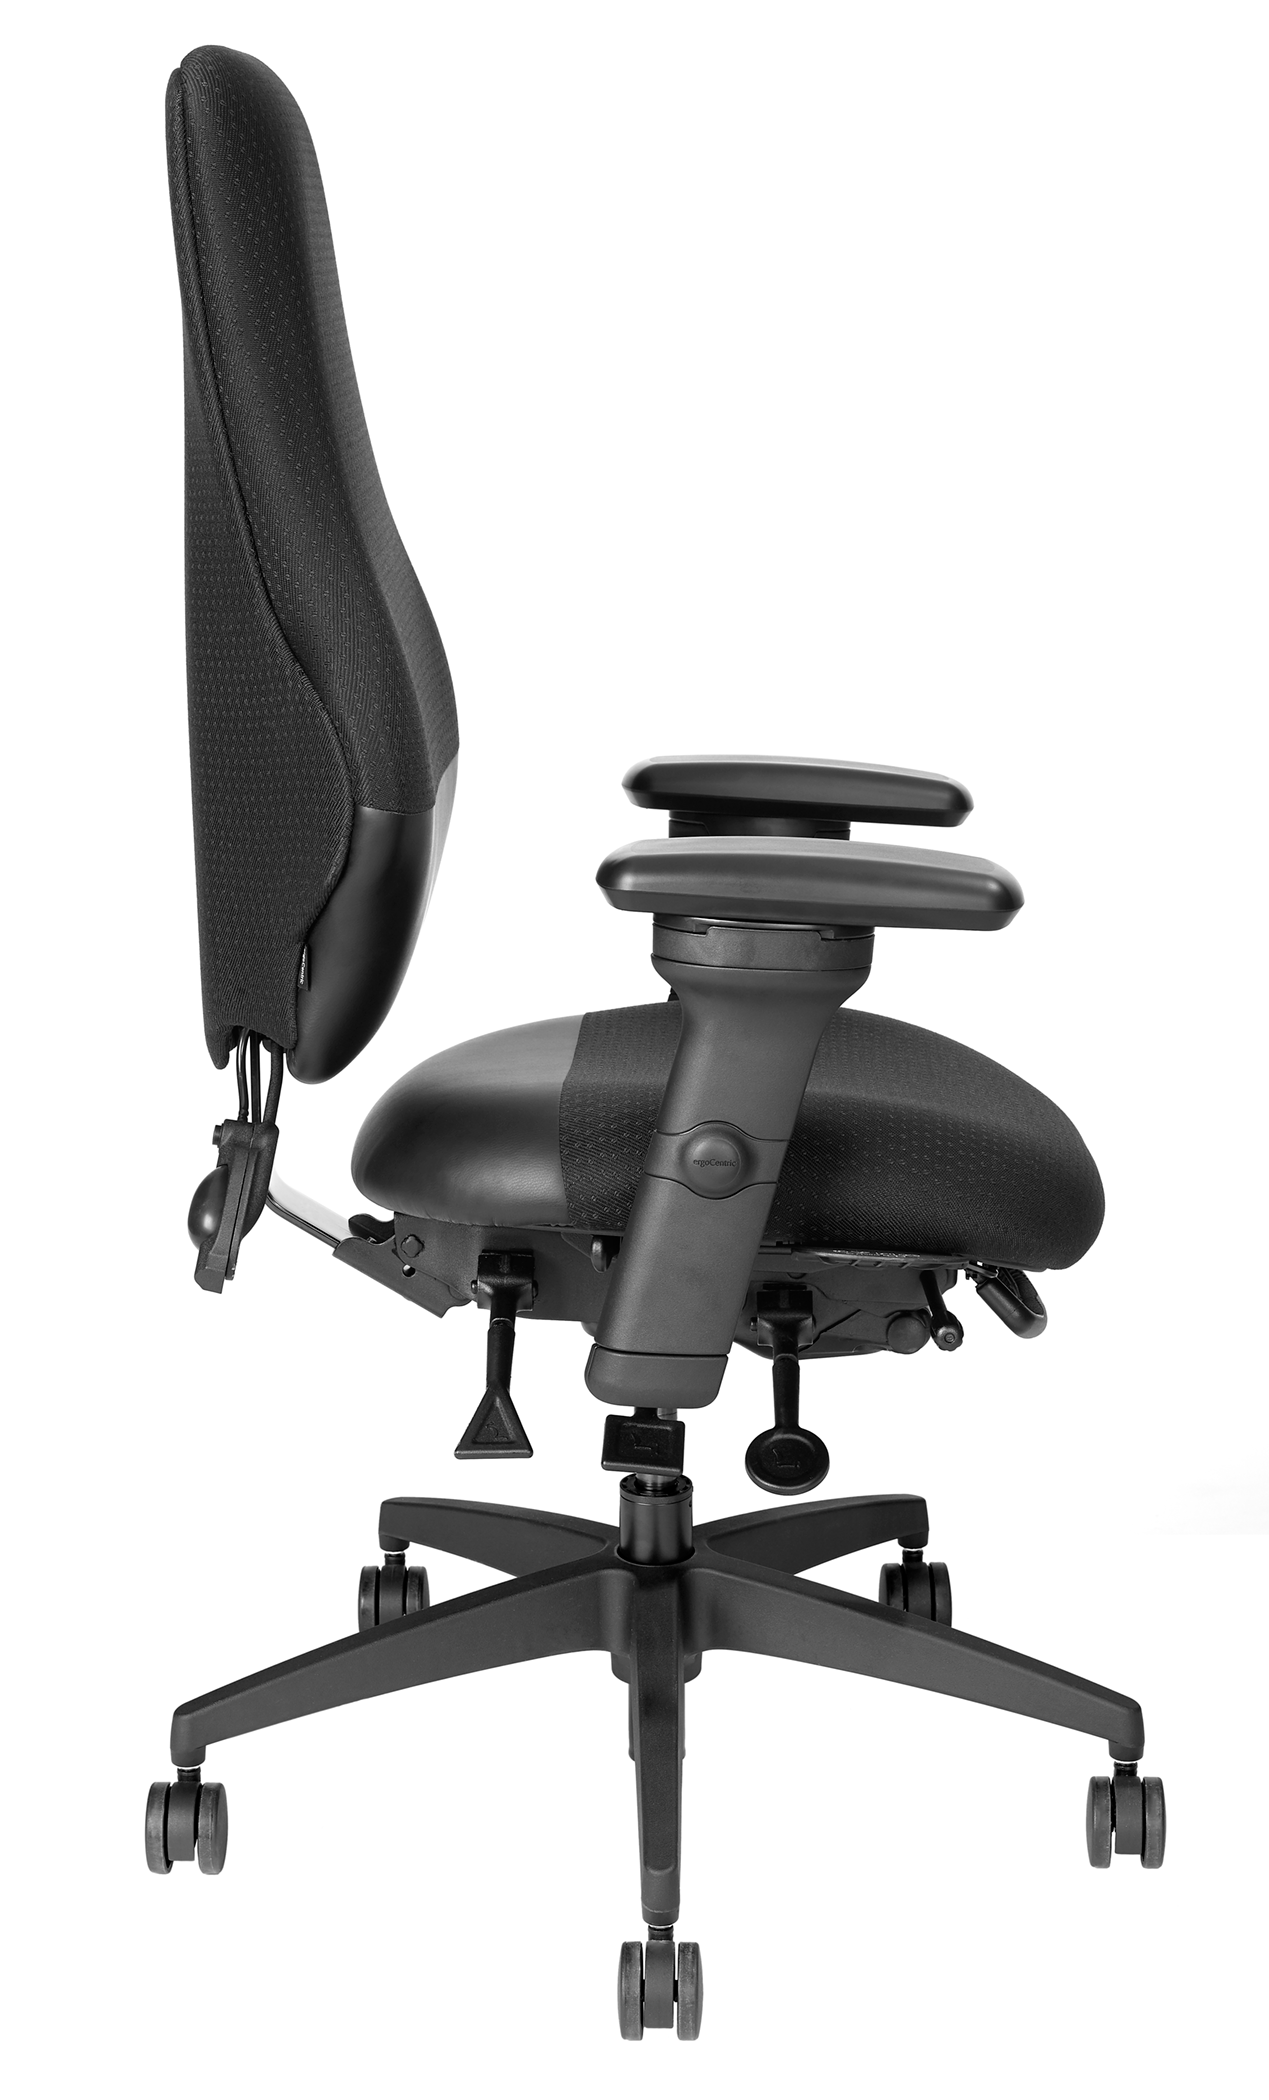 ObusForme Highback Chair Back Support – Ergo Experts